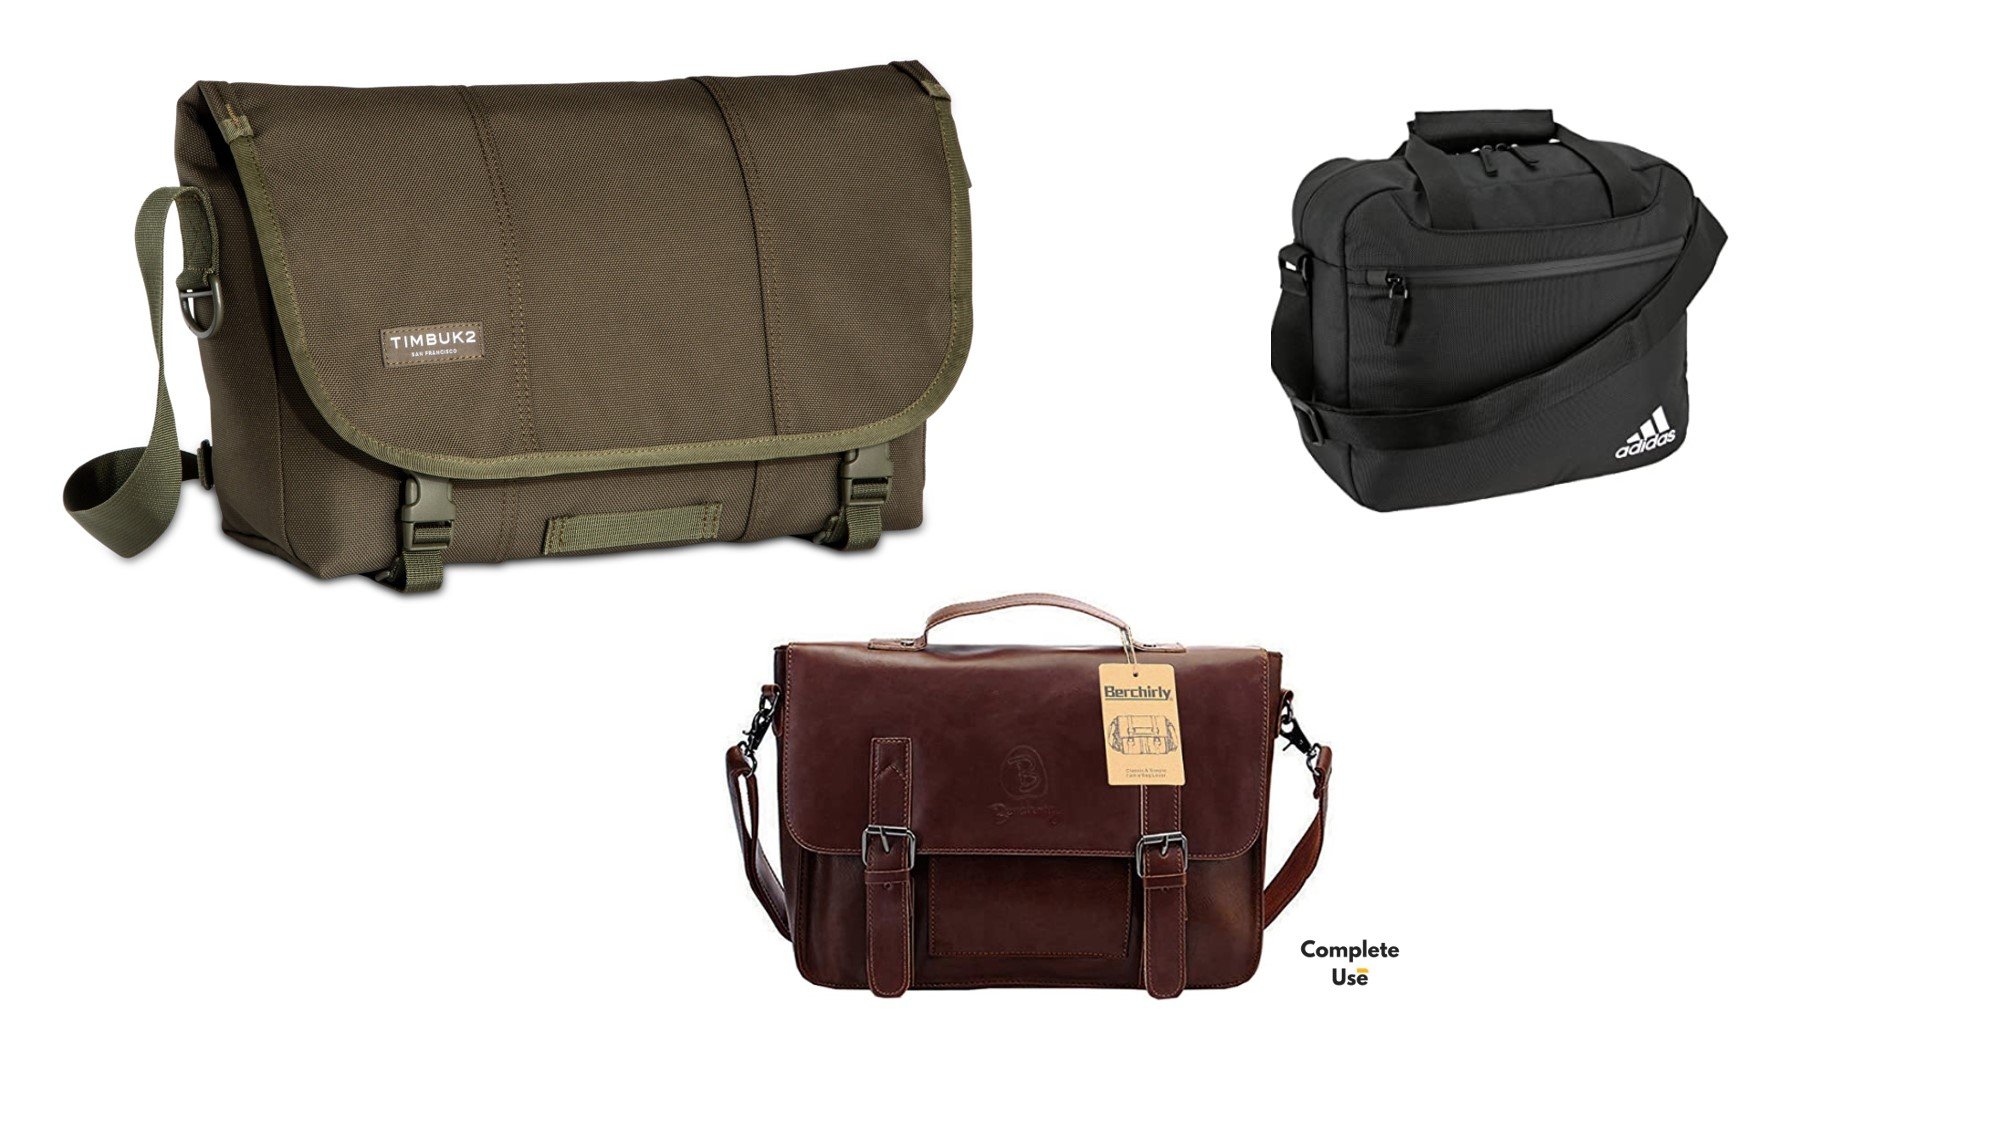 Top 5 Buy for Life Messenger Bags